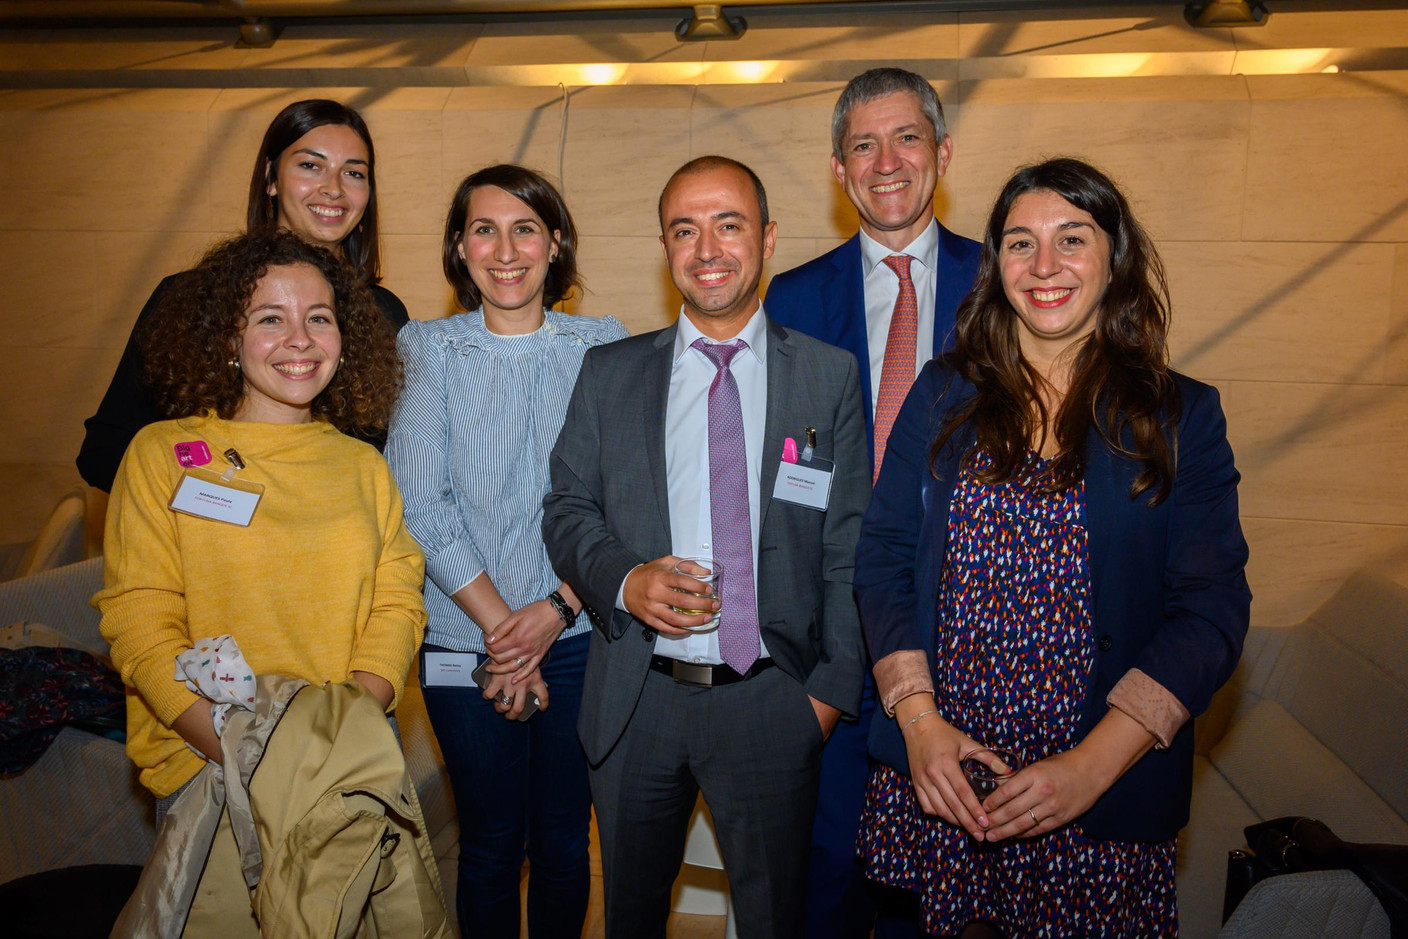 Paula Marques (Fortuna Banque), Lucie Rotario (IMS Luxembourg), Nancy Thomas (IMS Luxembourg), Manuel Rodrigues (Fortuna Banque) Christian Scharff, (IMS Luxembourg) et Catia Fernandes (IMS Luxembourg) (Photo: Charles Caratini et Michel Brumat pour IMS Luxembourg)